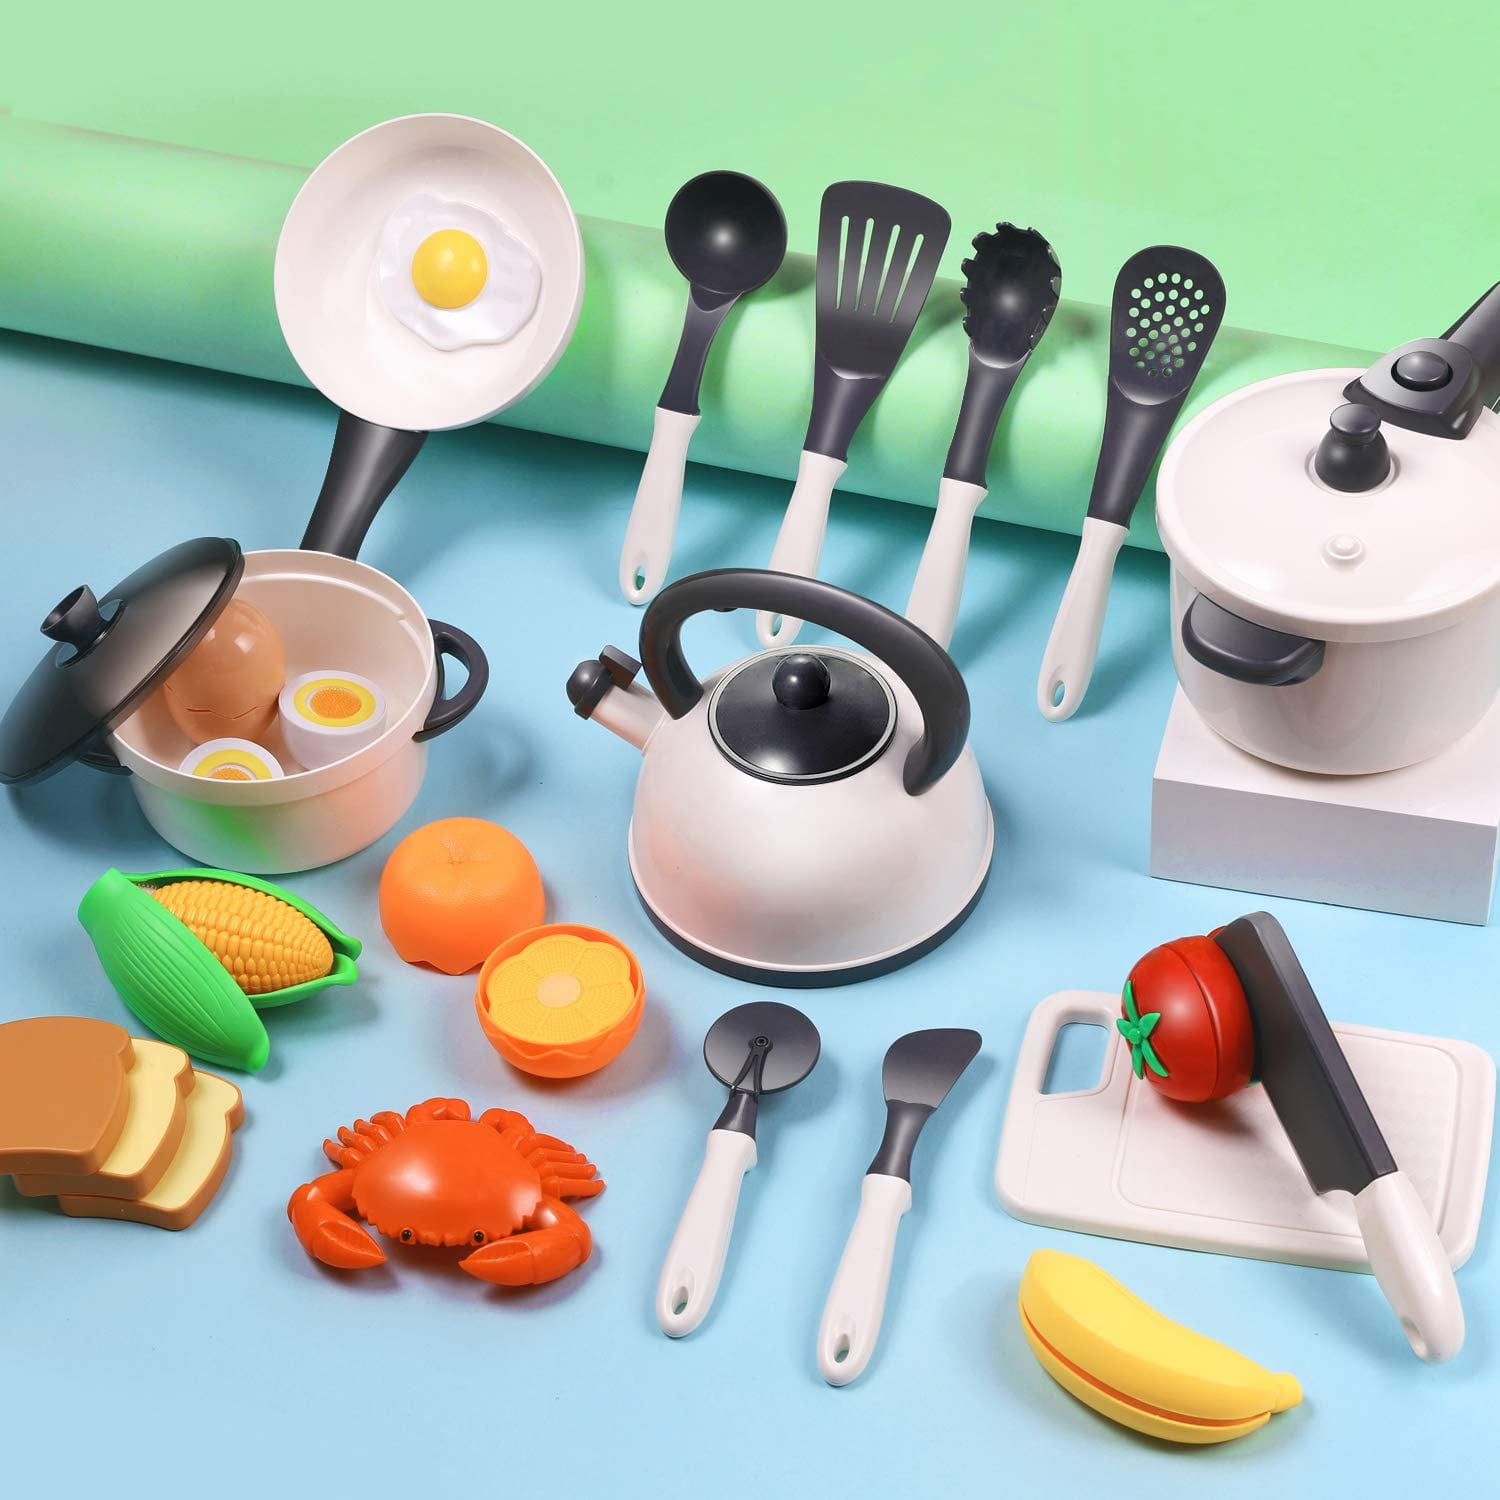 10Pcs Kid Play House Toy Kitchen Utensils Cooking Pots Pans Food Dishes Cookware 